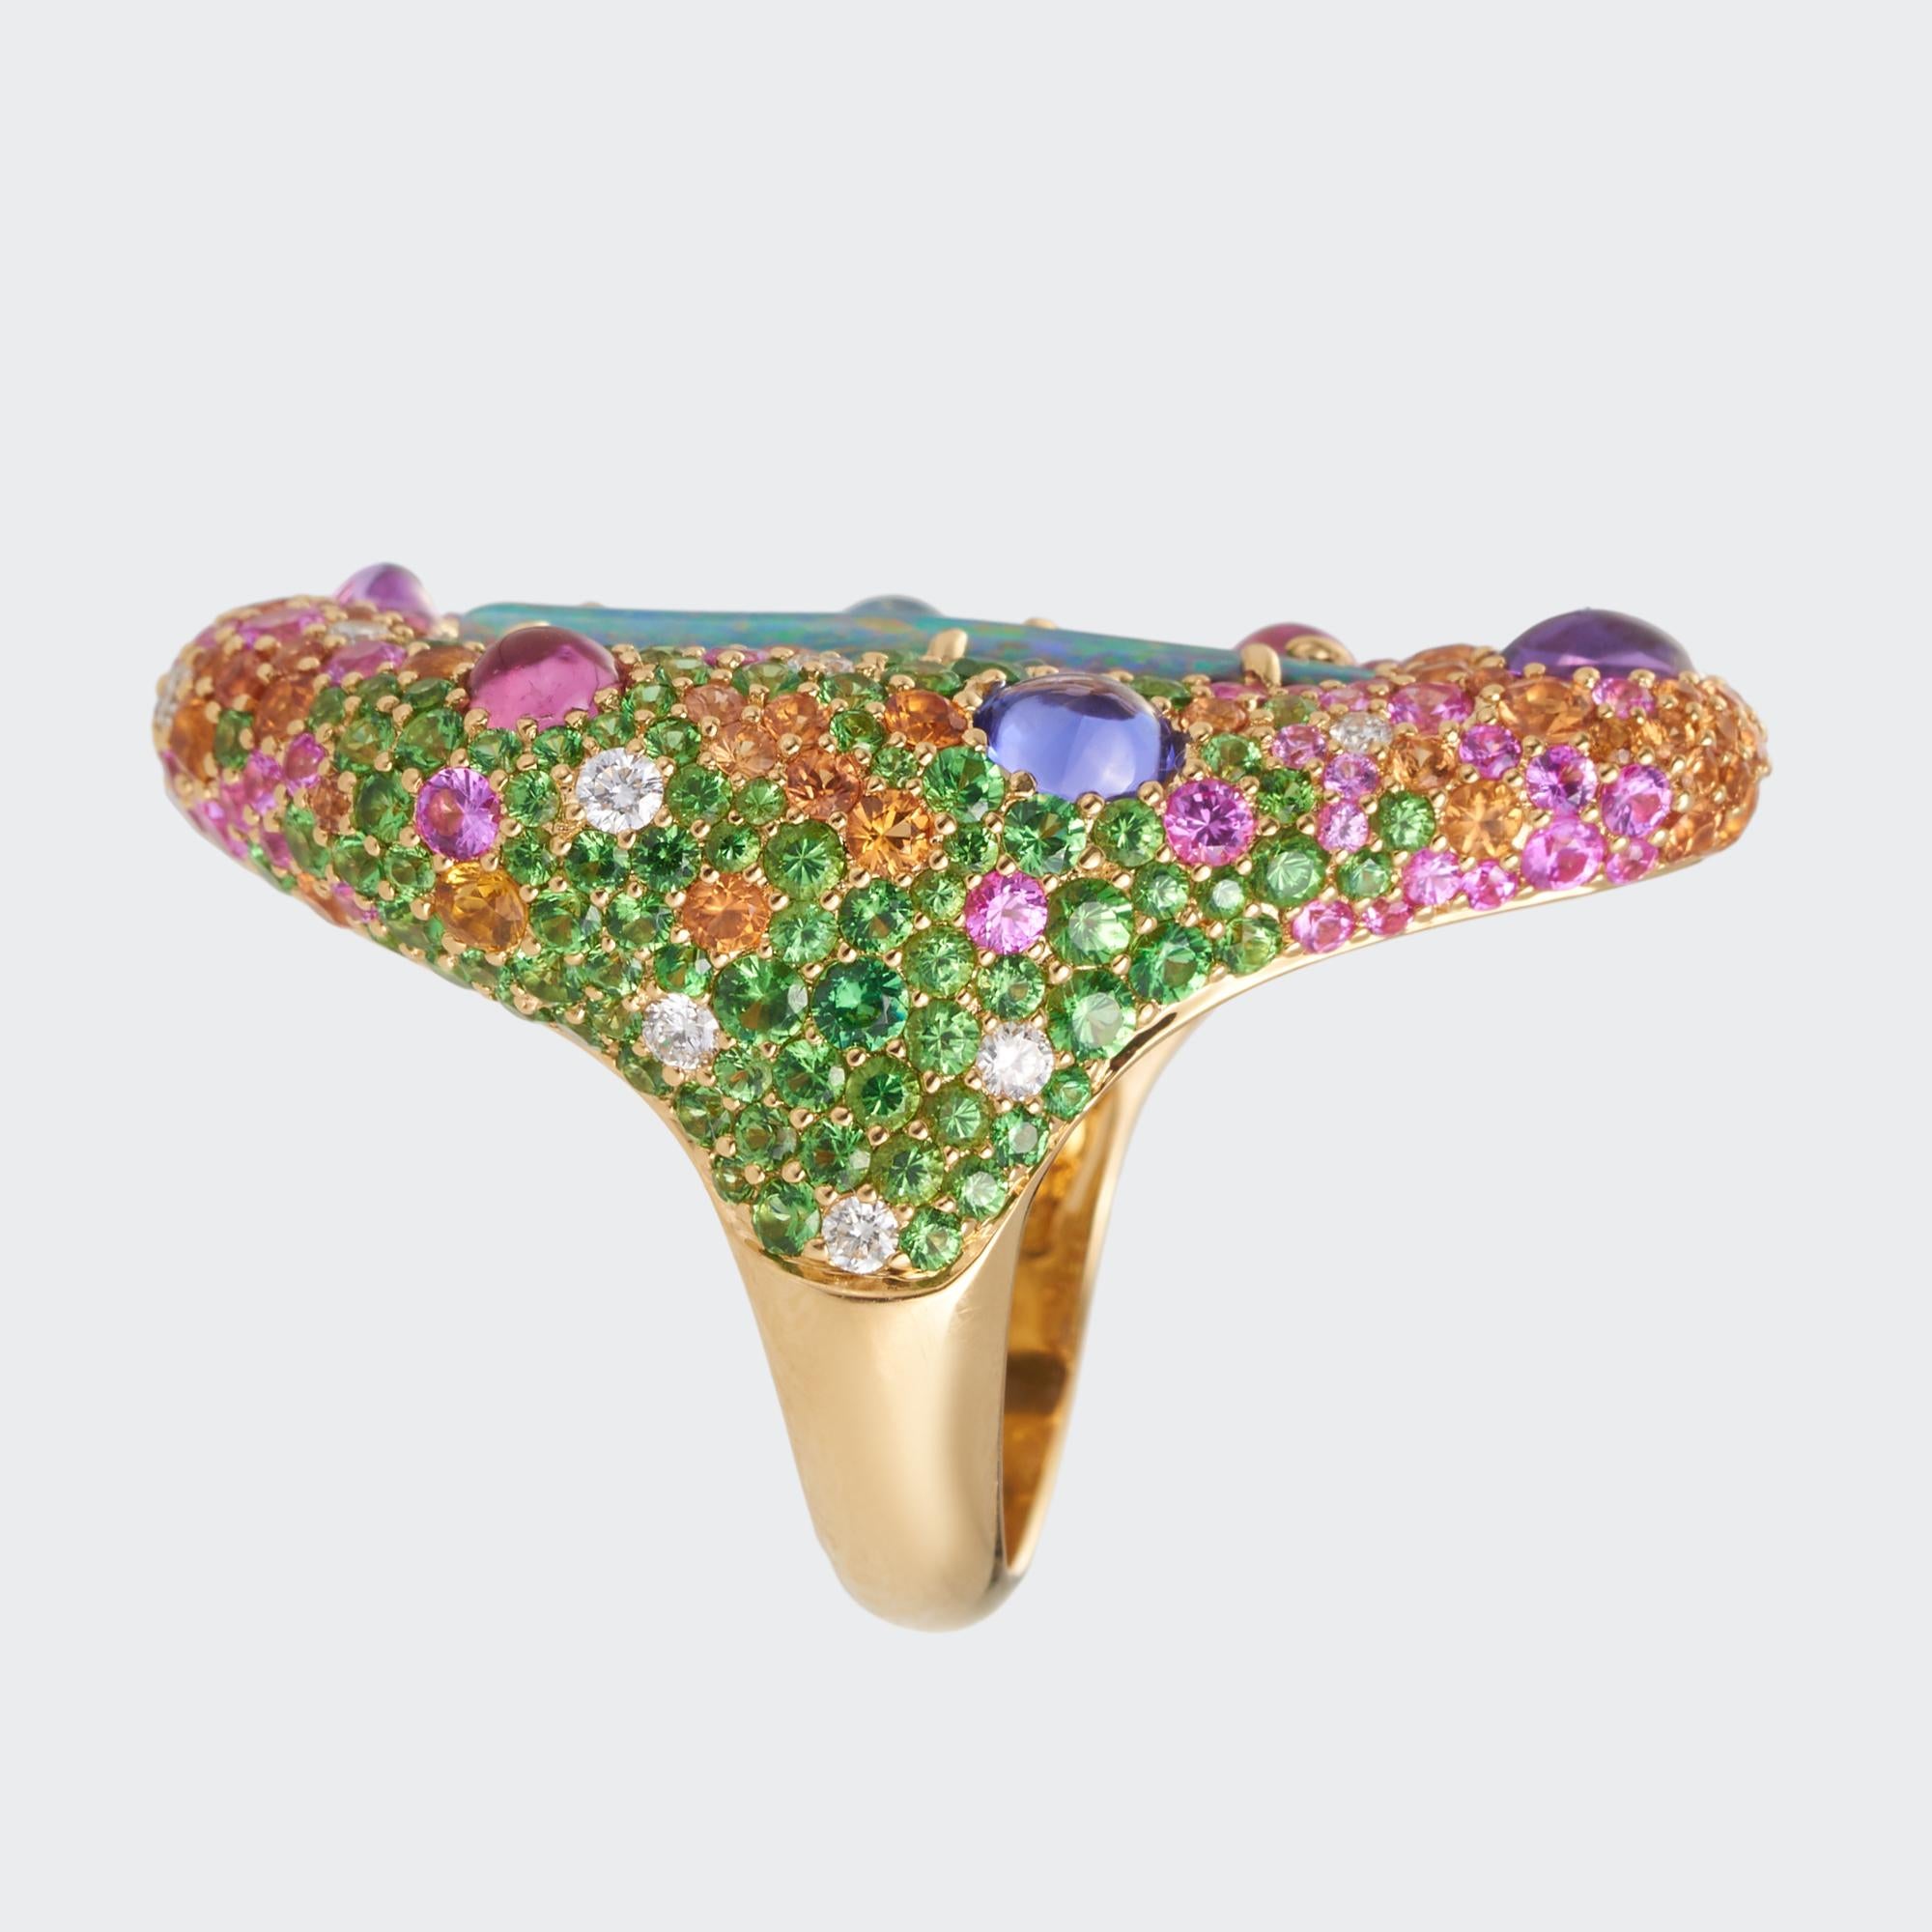 18 karat Yellow Gold Opal Ring, featuring a 8.90ct Solid Natural Queensland Boulder Opal surrounded by diamonds 0.48ct, sapphire 0.42ct, yellow sapphires 2.14cts, pink sapphires 2.57cts, purple sapphires 0.69ct, tanzanite 0.34ct, tsavorites 4.19cts